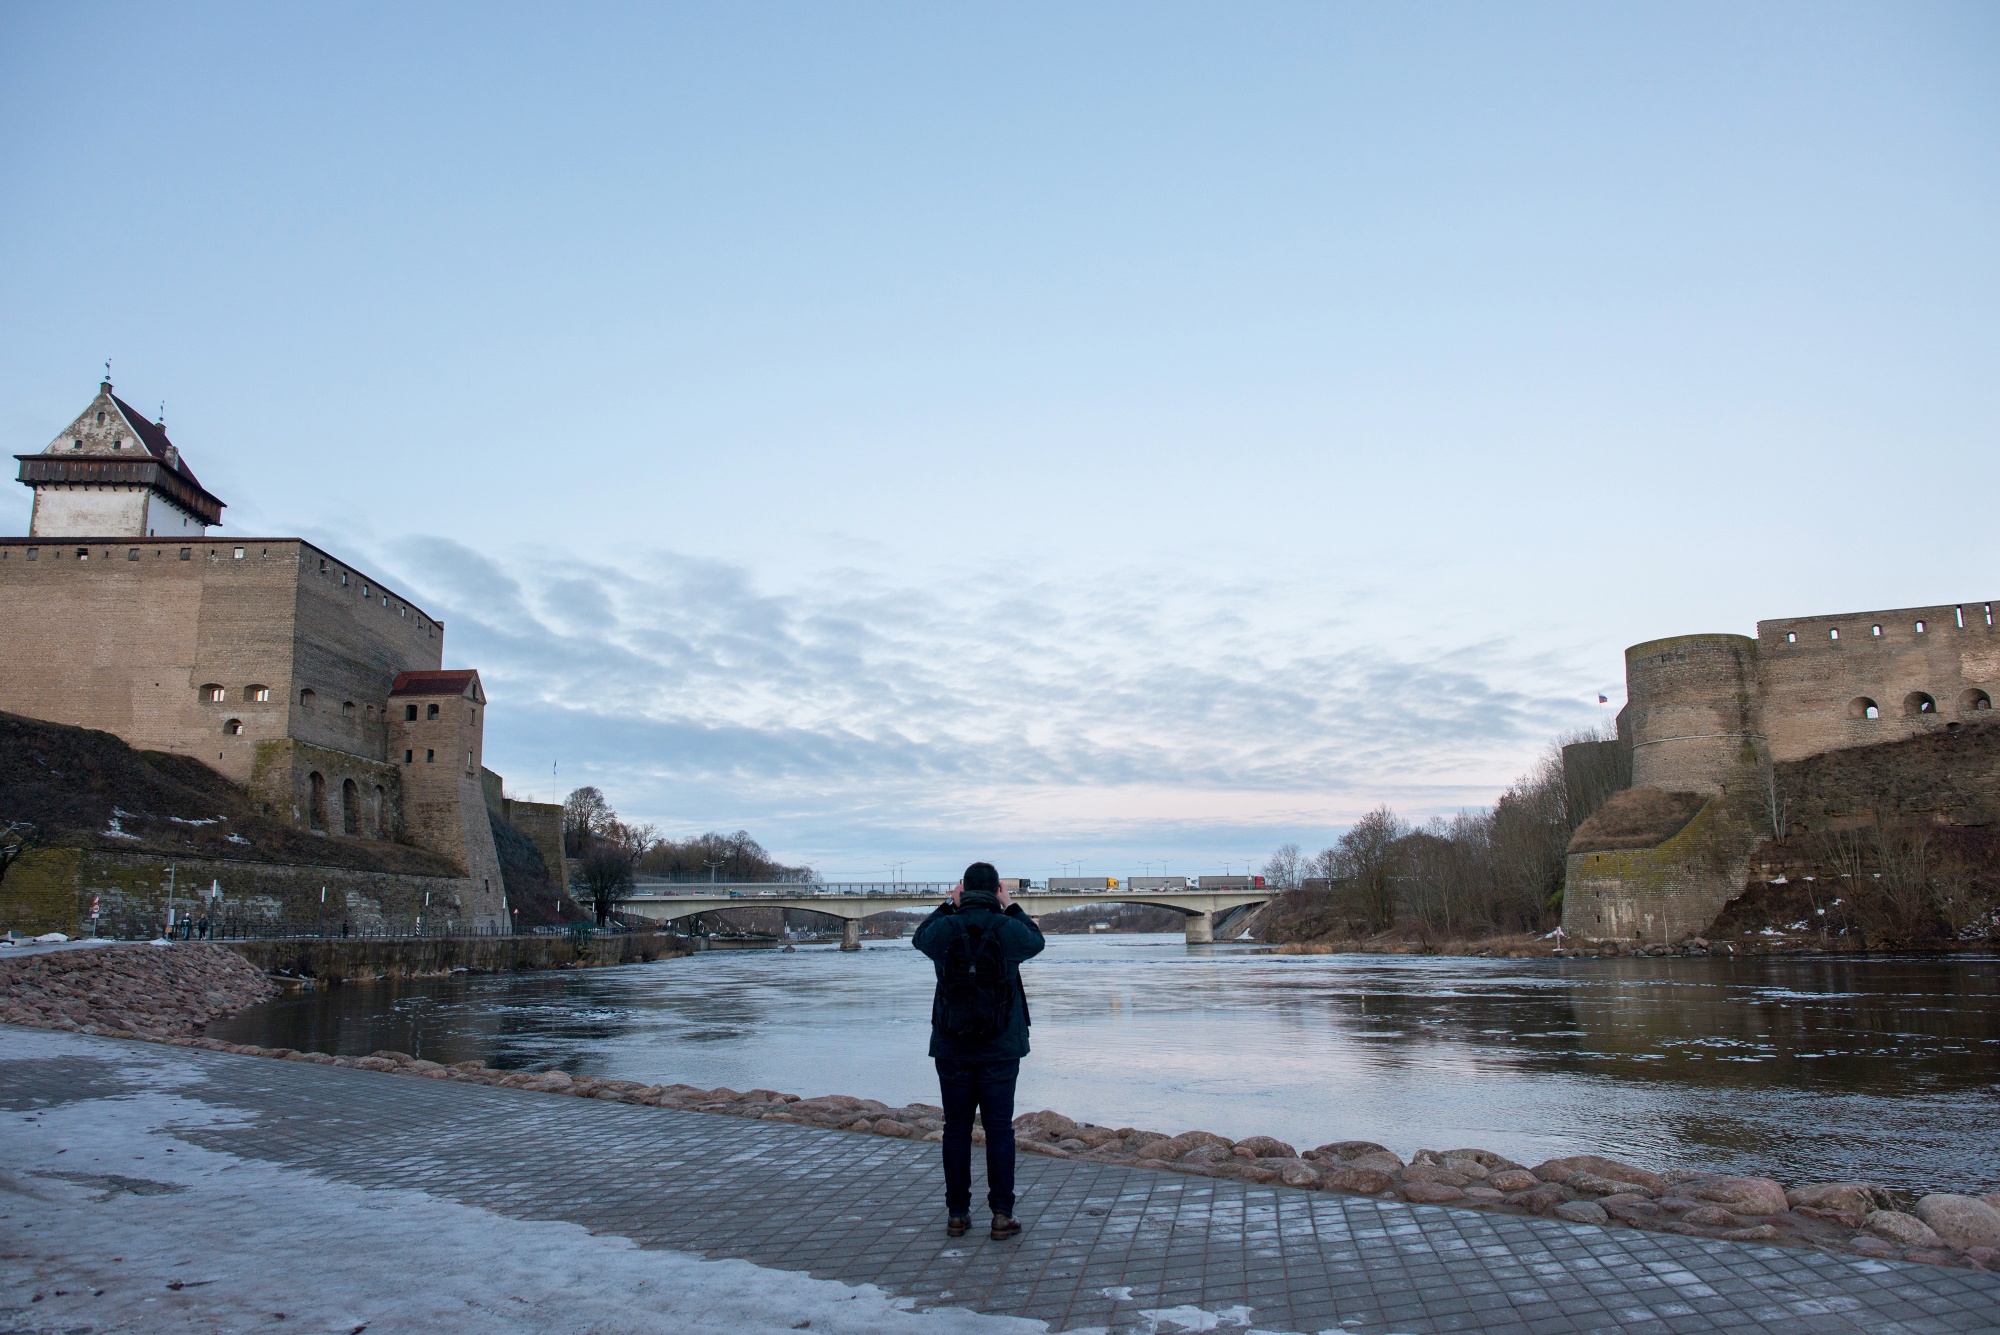 The Russia-Estonia&nbsp;frontier at Narva has long been a flashpoint for tensions.